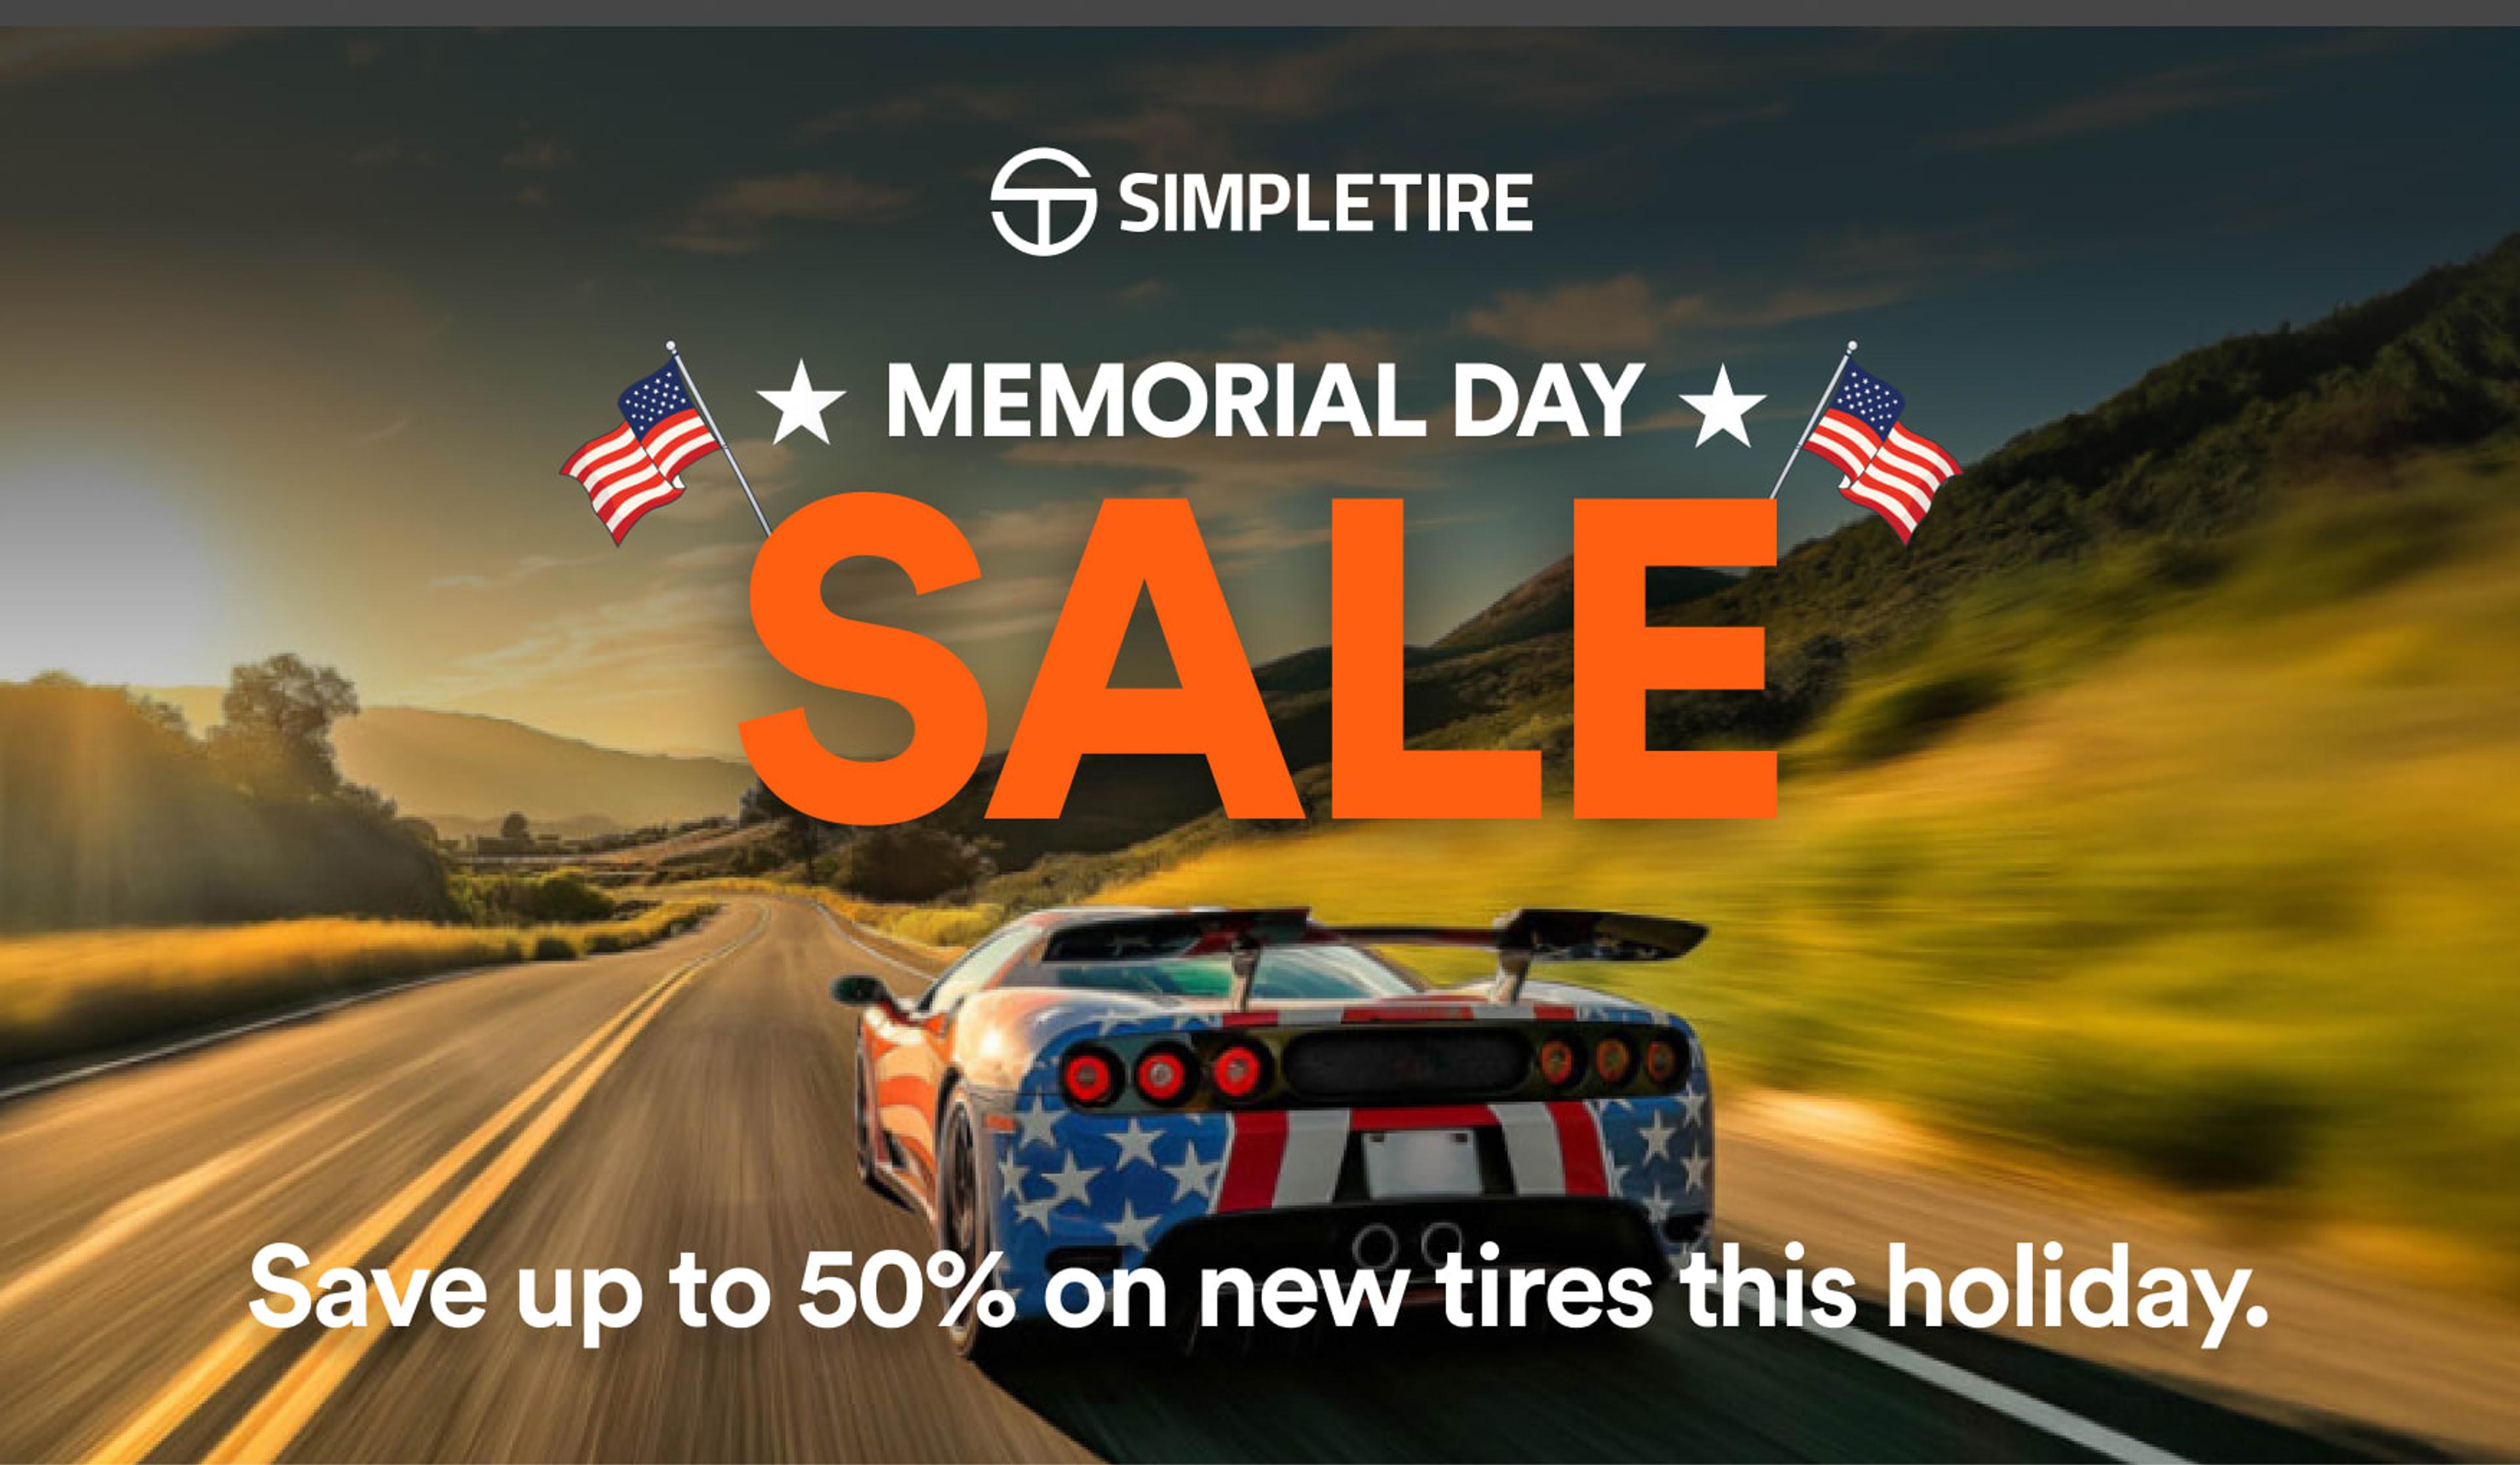 Memorial Day Simple Tire Sale